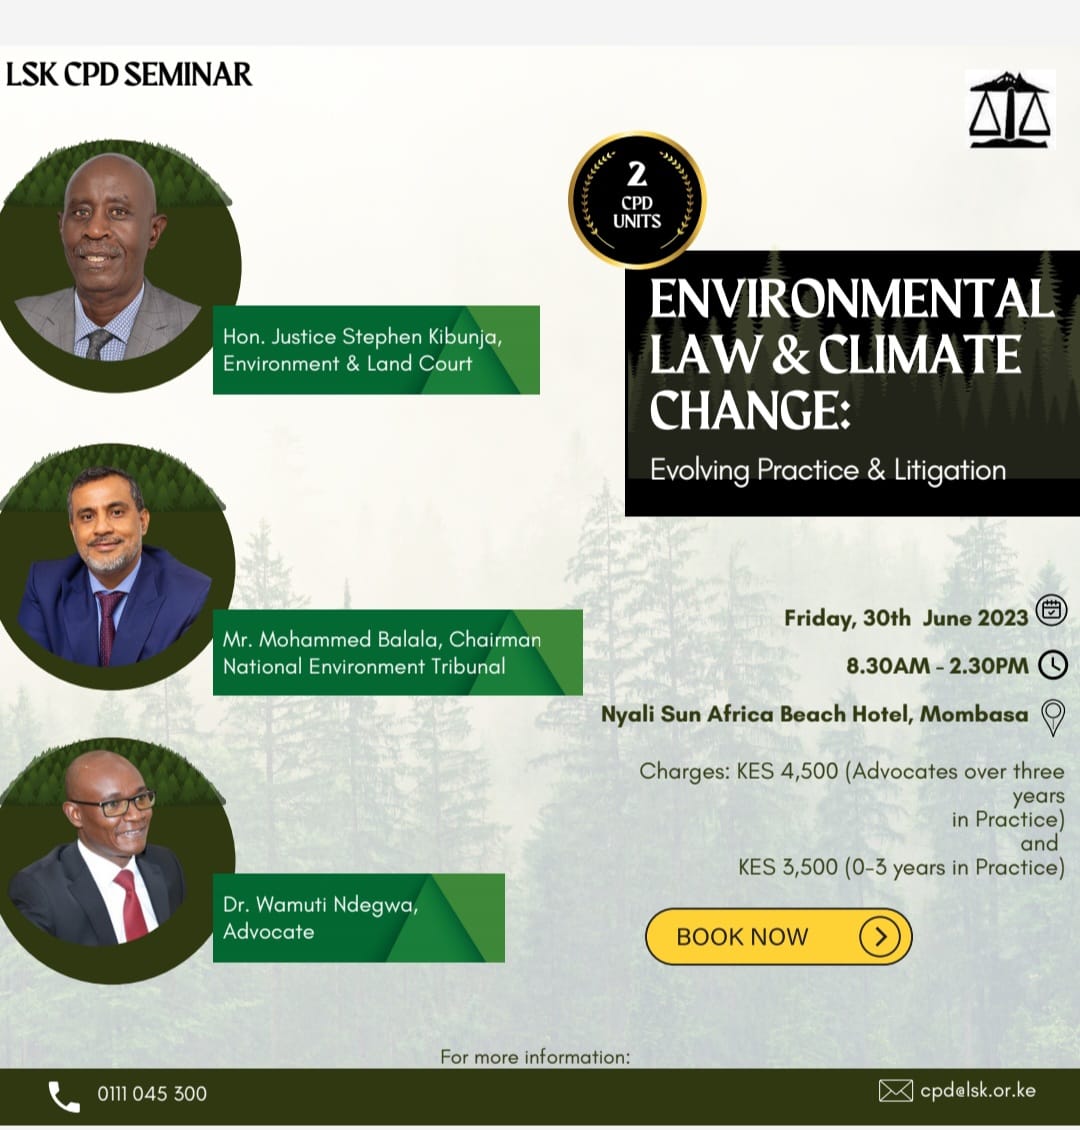 Climate Change 2 CPD points Seminar at Mombasa

Dear Members, 

The CPD Seminar on Climate Change is on Friday 30.06.2023
 at Nyali Sun Africa Beach Hotel attracting  2 CPD points.

It will benefit ELC practitioners, Conveyancers, PIL lawyers and legal scholars. 1/2